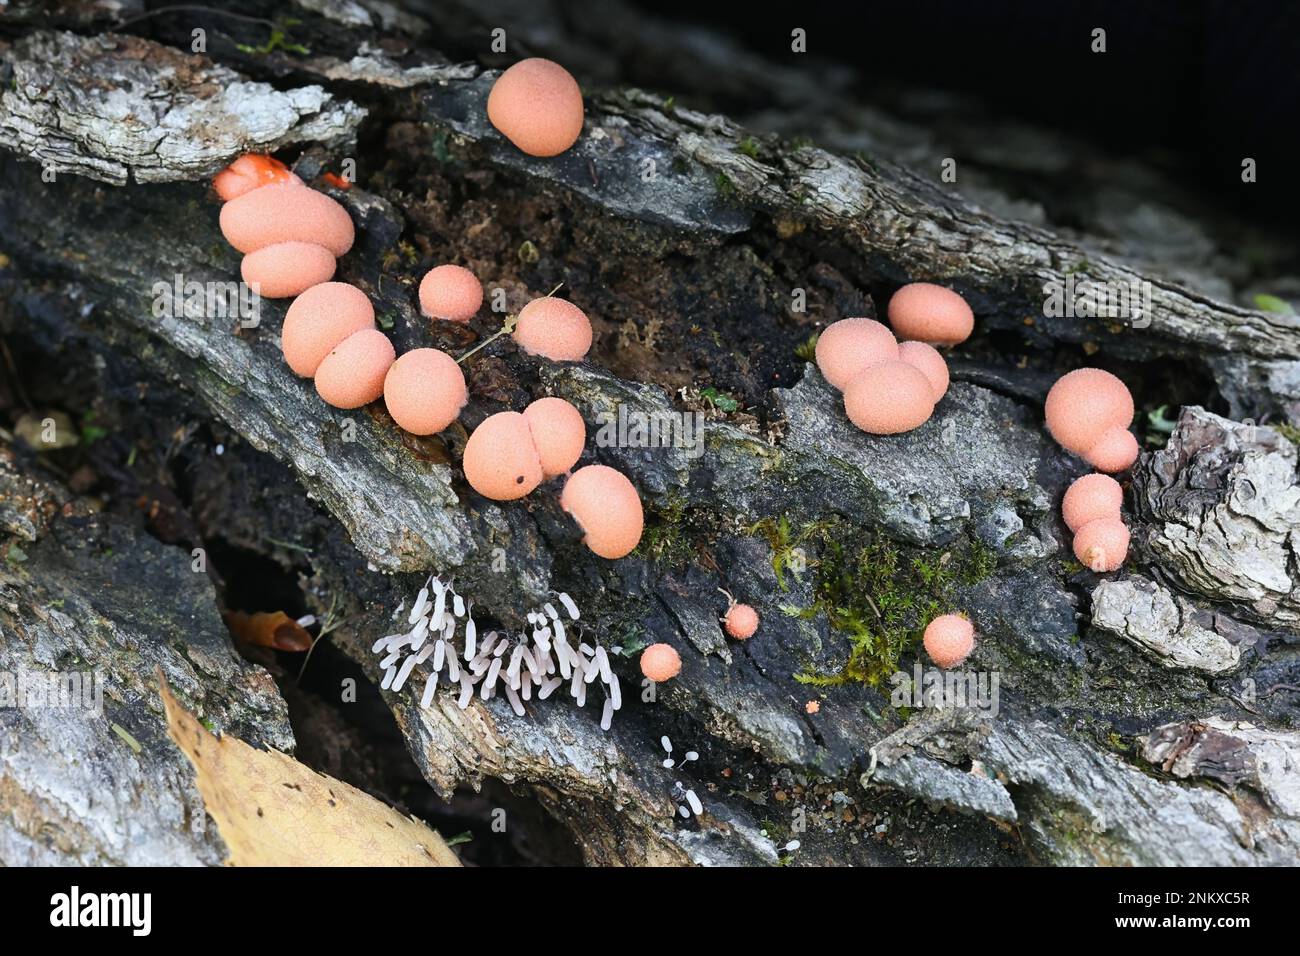 Stemonitopsis typhina, also called Comatricha typhoides, a slime mold of the order Stemonitida, immature specimen from Finland Stock Photo